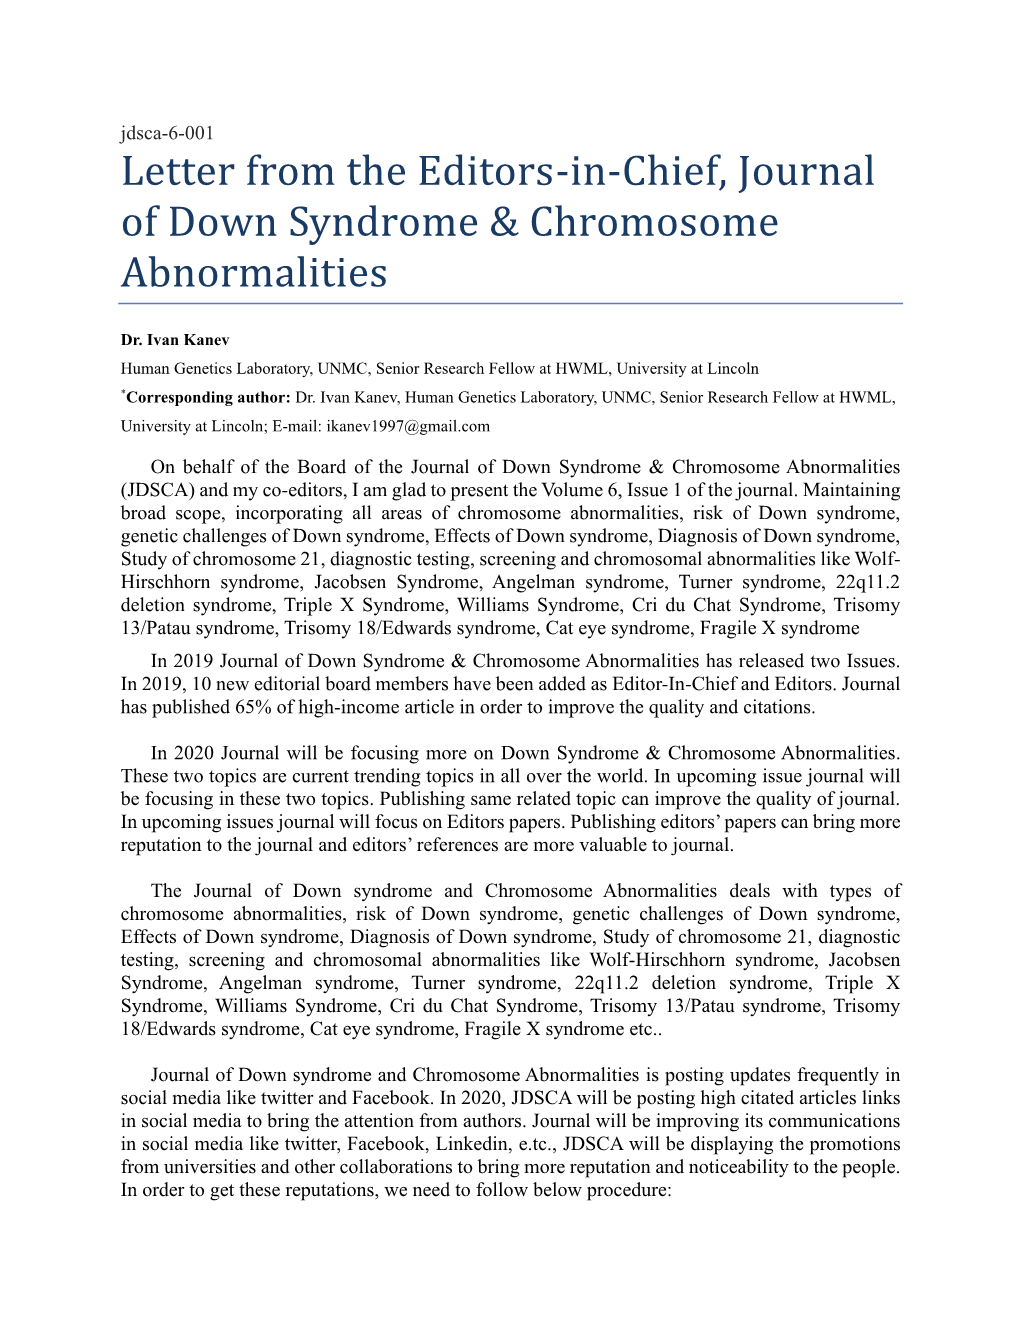 Letter from the Editors-In-Chief, Journal of Down Syndrome & Chromosome Abnormalities